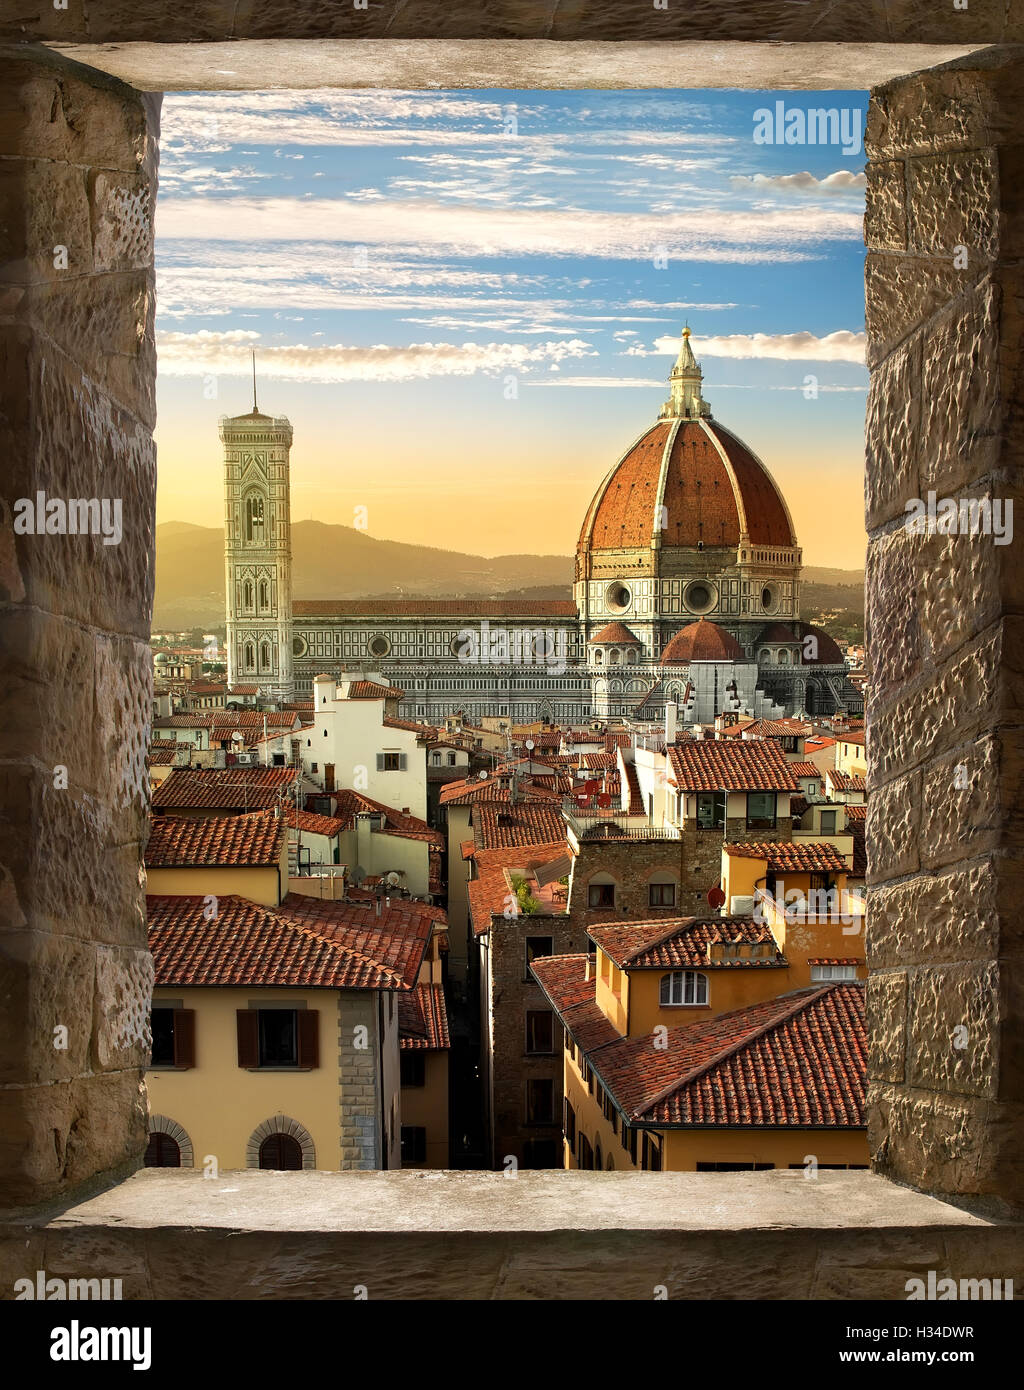 View on Cattedrale di Santa Maria del Fiore in Florence from ancient window, Italy Stock Photo